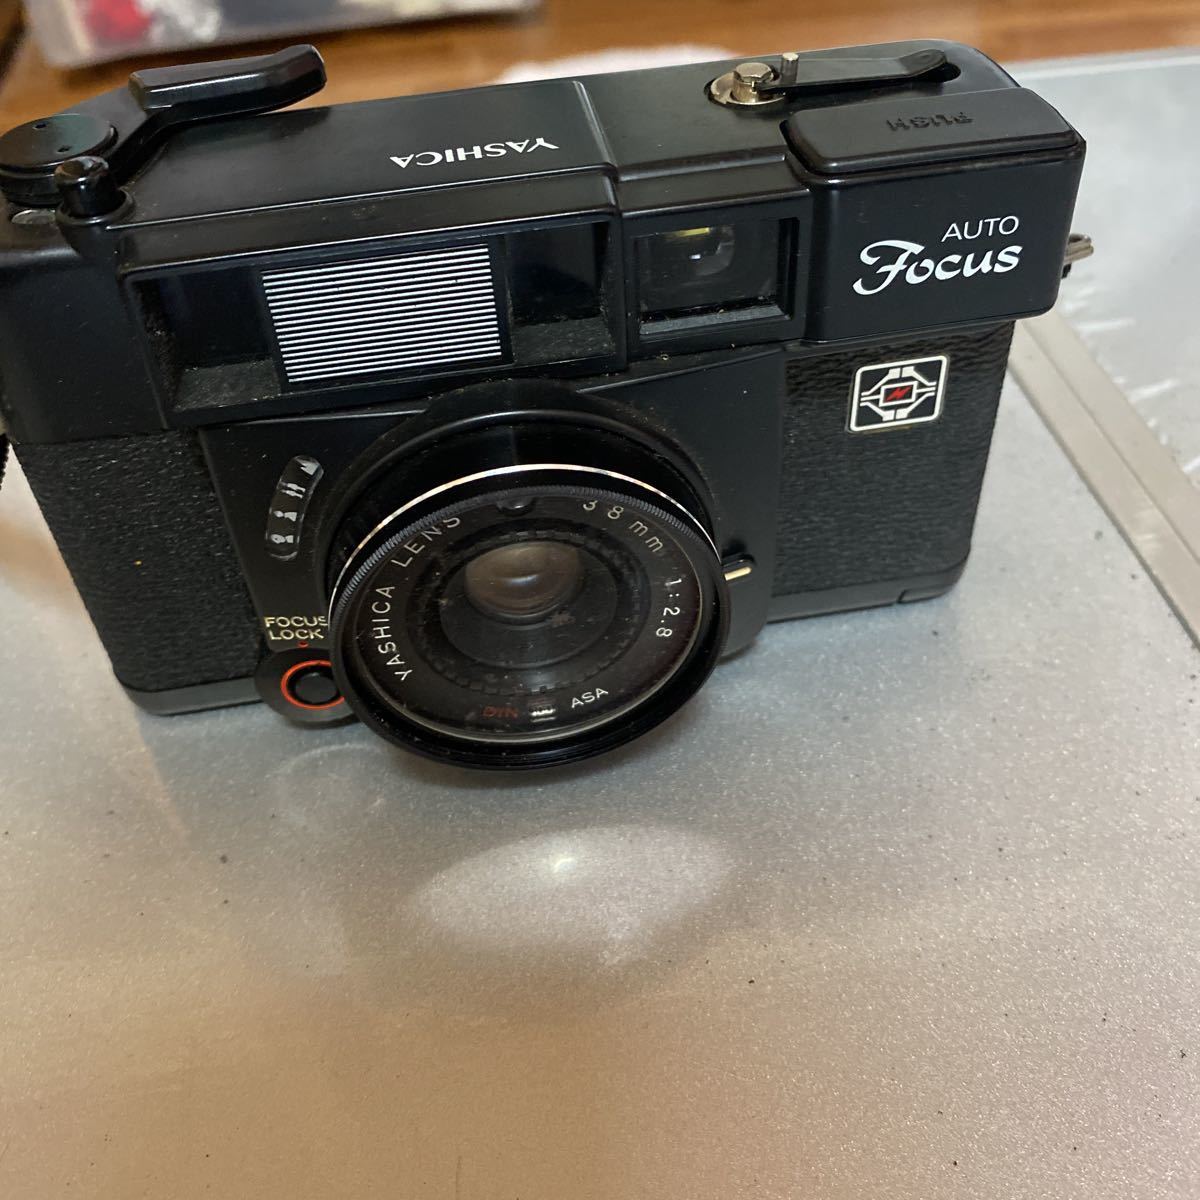 Yashica ヤシカ 古いカメラ ジャンク品 発送サイズ60 Product Details Yahoo Auctions Japan Proxy Bidding And Shopping Service From Japan